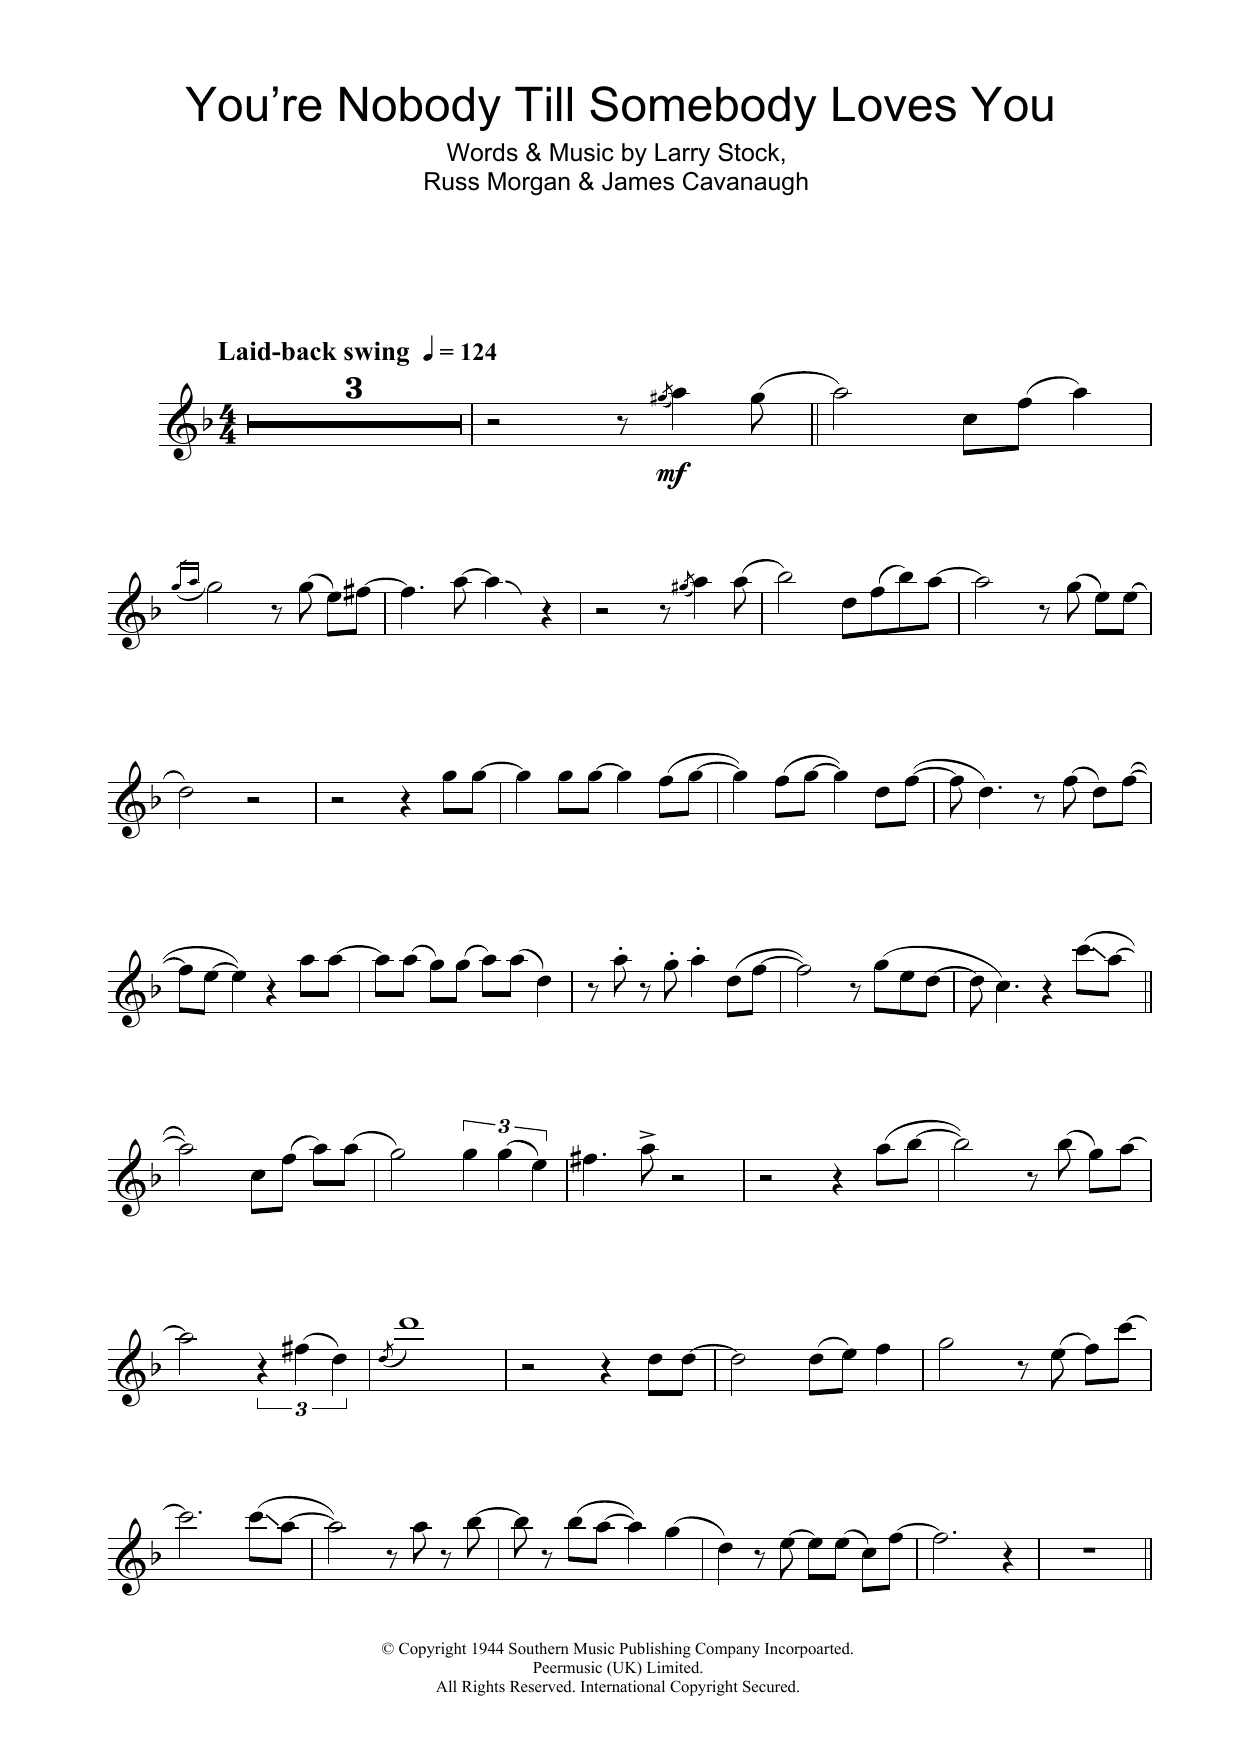 You're Nobody Till Somebody Loves You sheet music